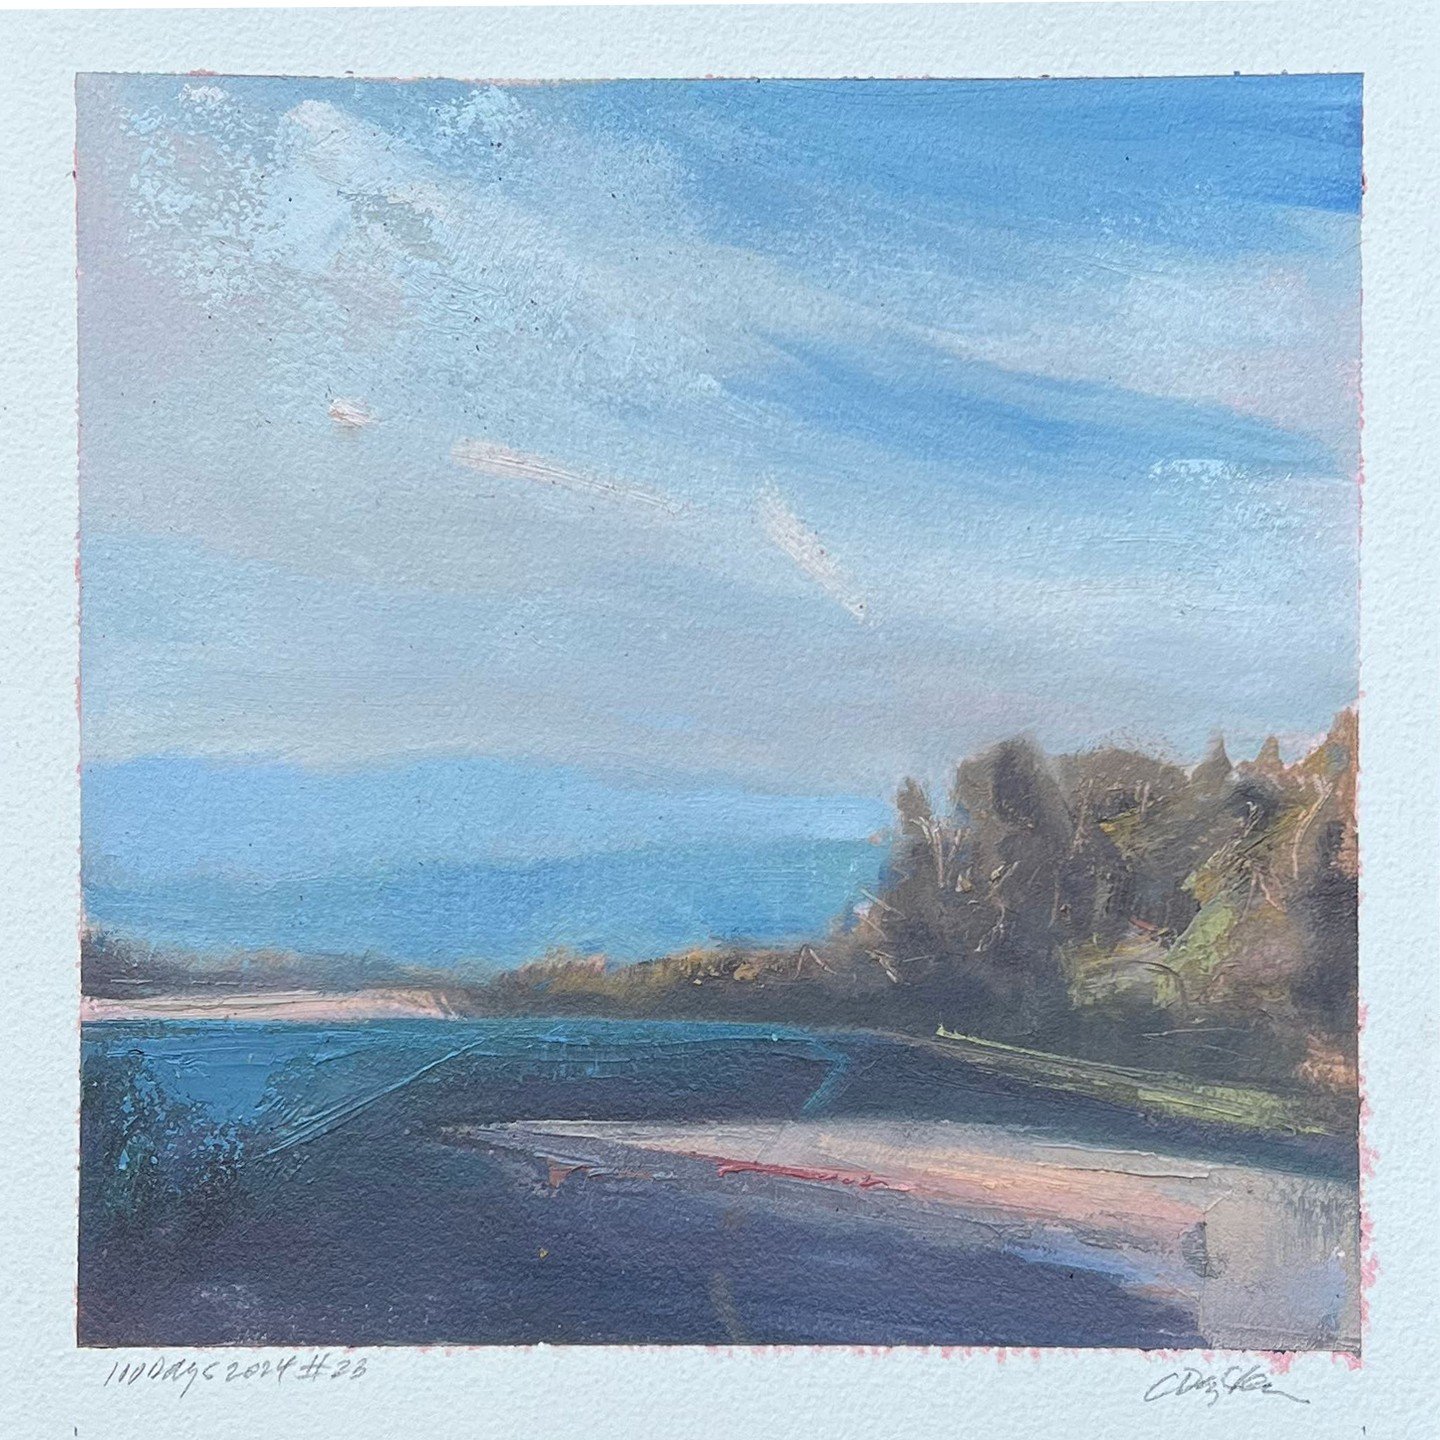 23/100 #100daysoflandscapestudies
8x8 oil on paper
#the100dayproject